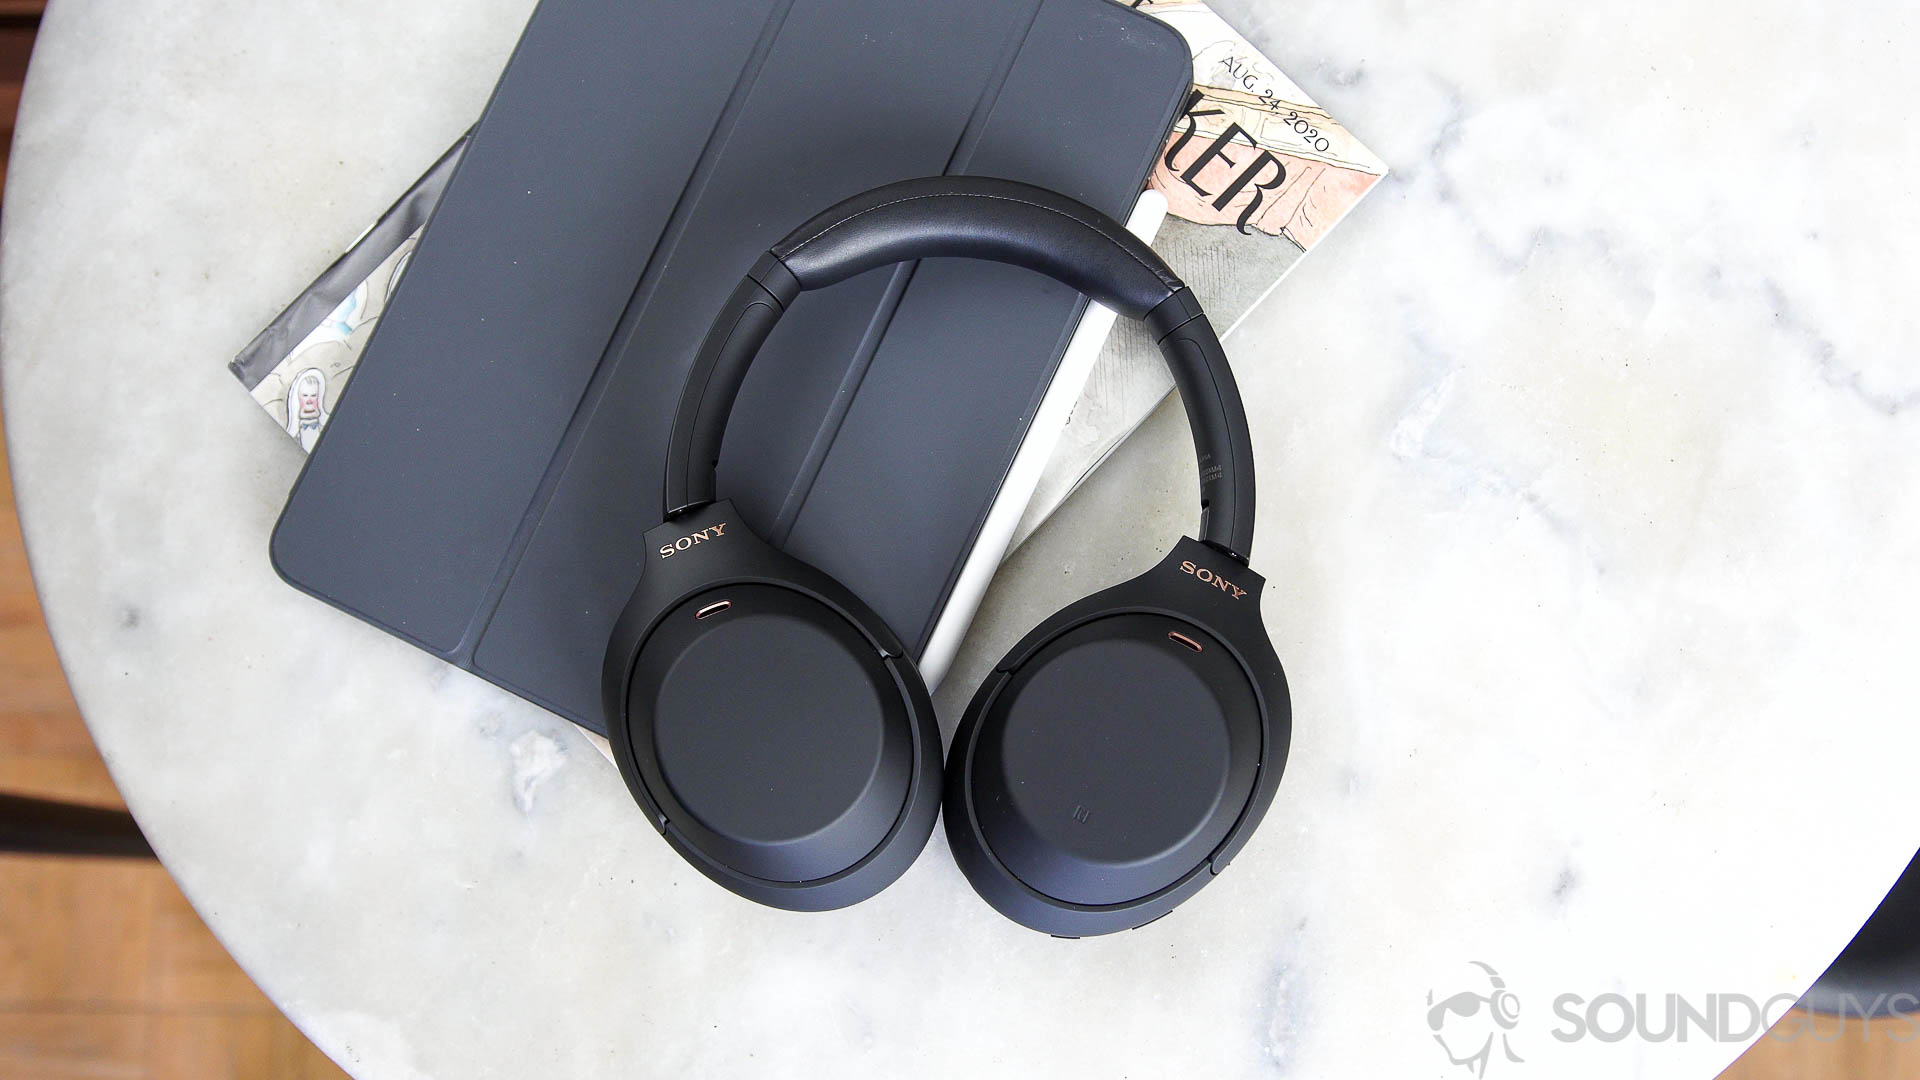 The Sony WH 1000XM4 noise cancelling headphones. Sony Black Friday deals.